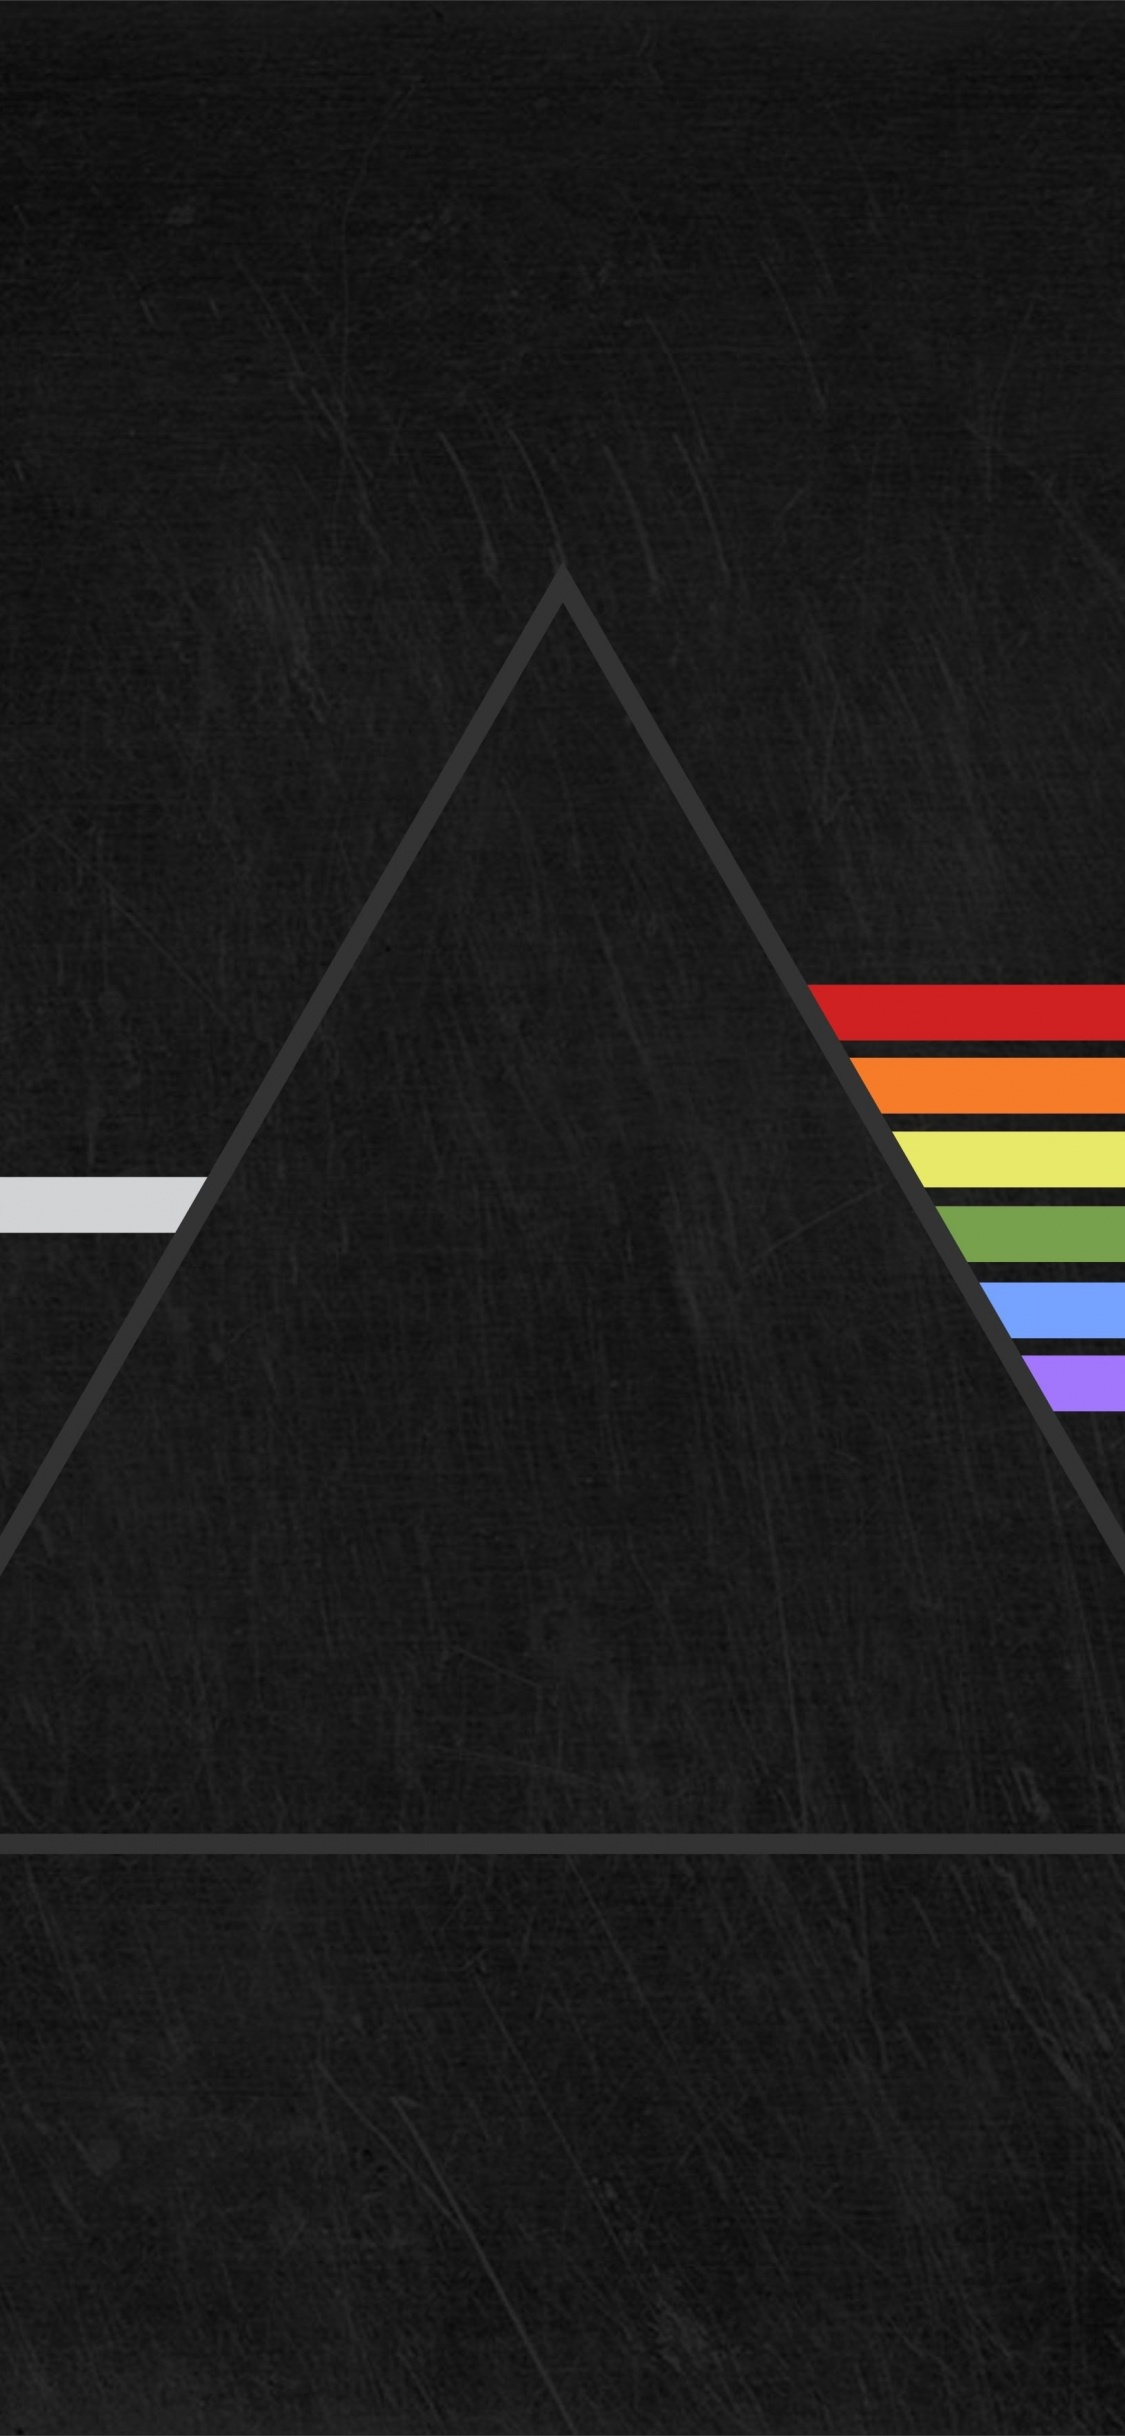 The Dark Side of The Moon, Pink Floyd, Prism, Black, Line. Wallpaper in 1125x2436 Resolution